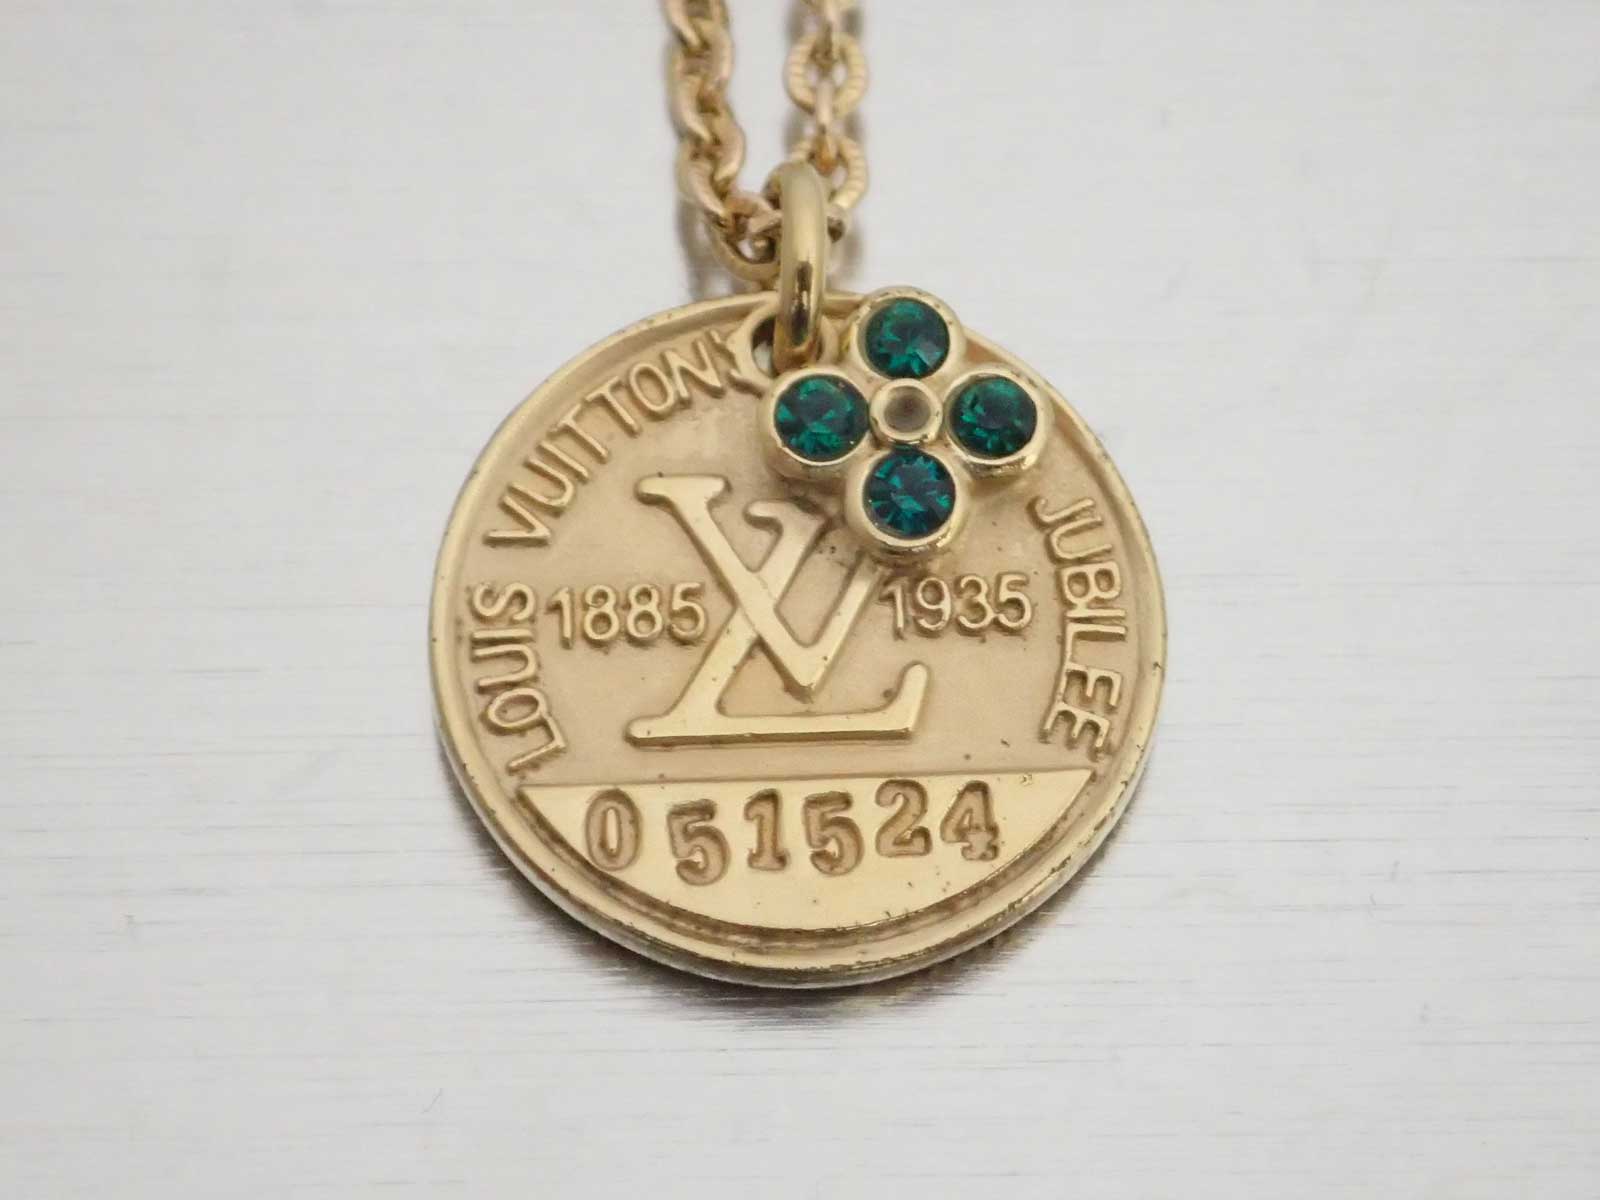 Auth Louis Vuitton Miss Windsor Medal Necklace Green/Goldtone w/Box - e43711 | eBay